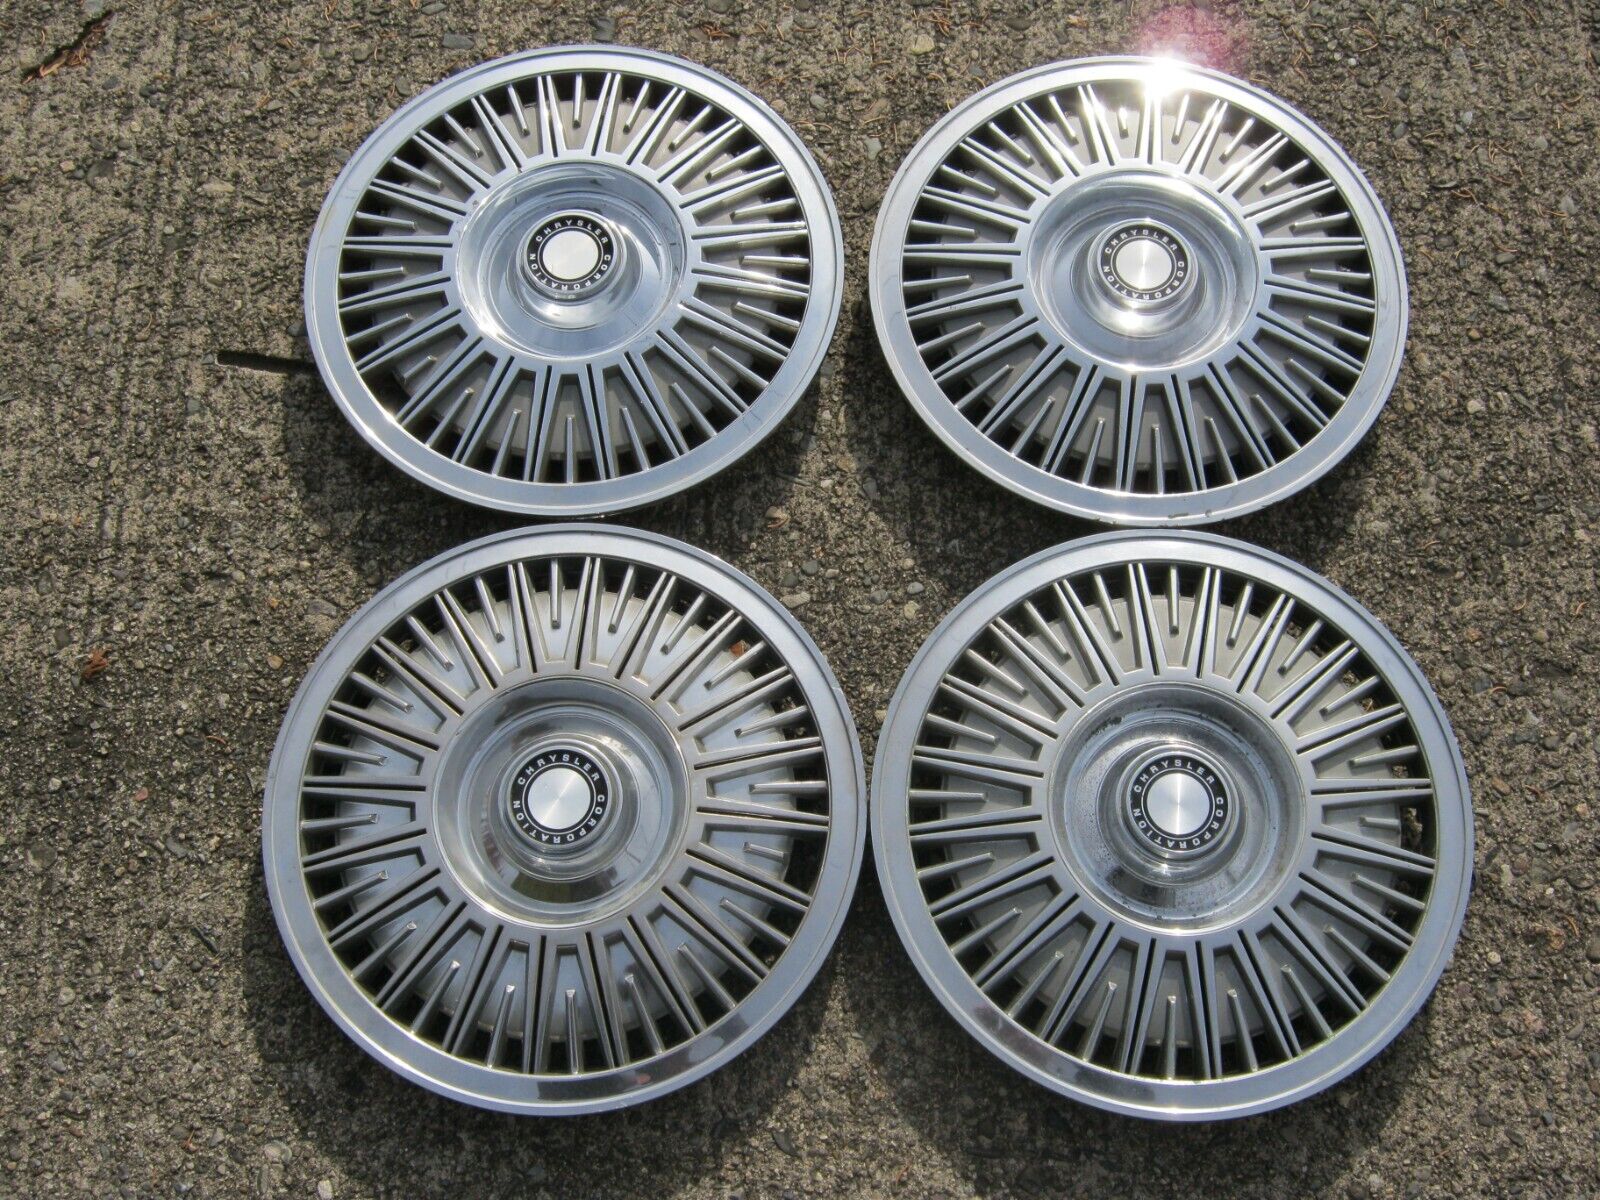 Factory 1981 1982 Plymouth Reliant Dodge Aries 14 inch hubcaps wheel covers nice